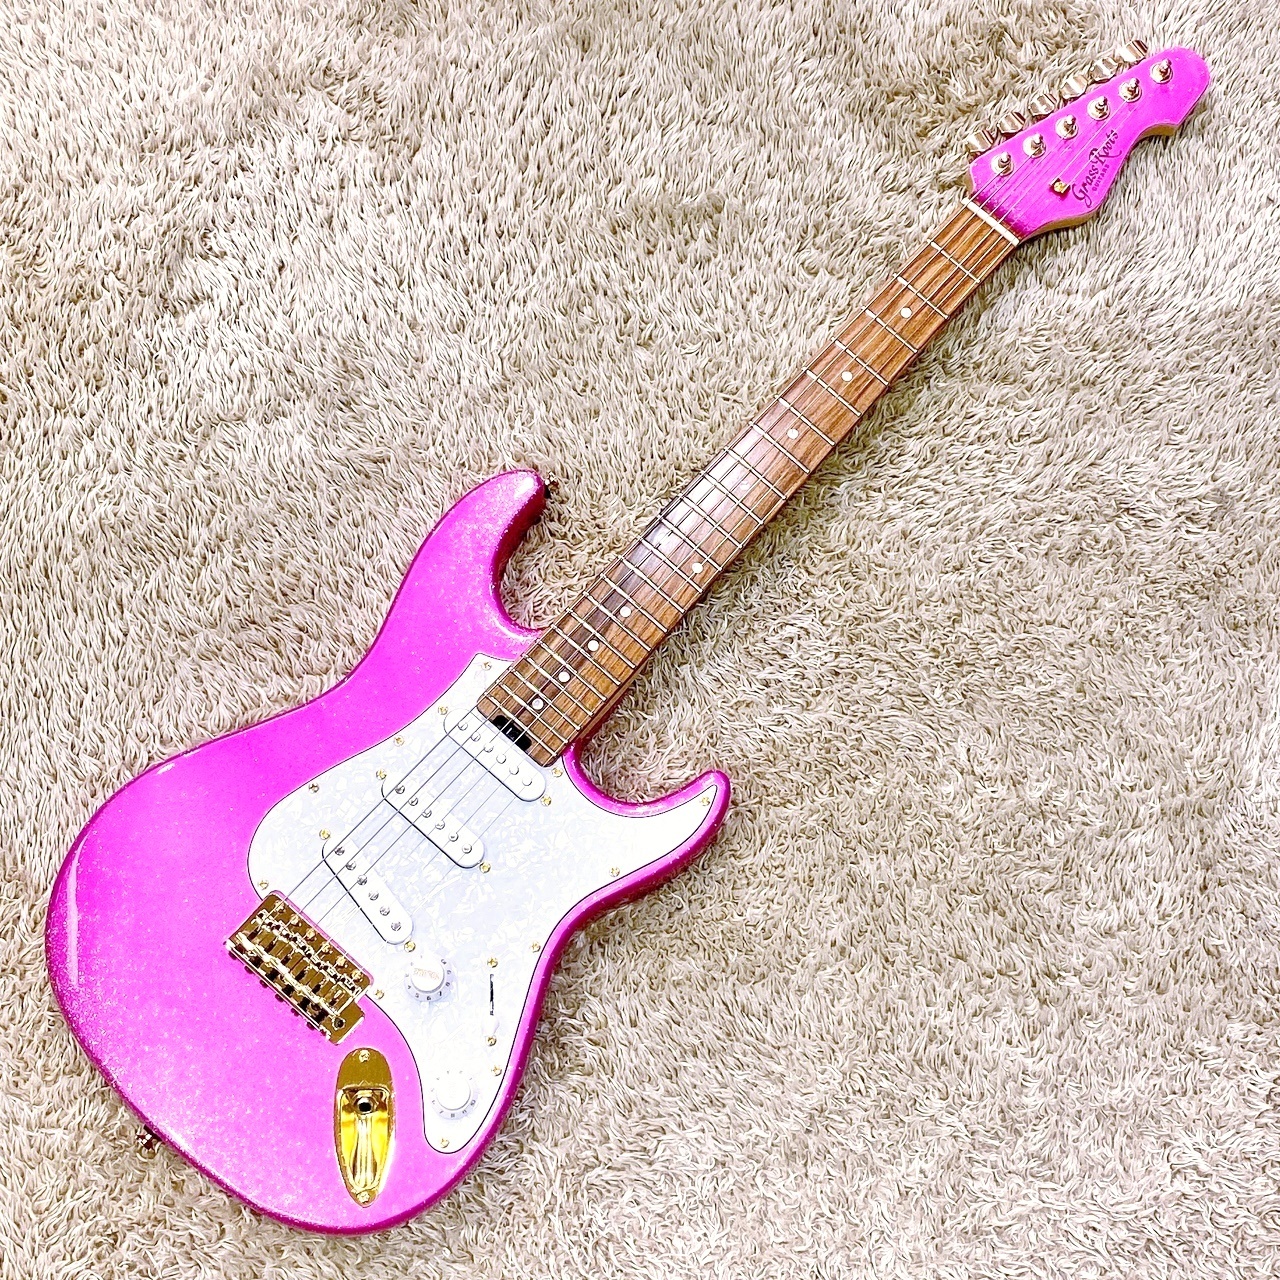 GrassRoots G-SN-62TO　Twinkle Pinkレギュラータイプの89%